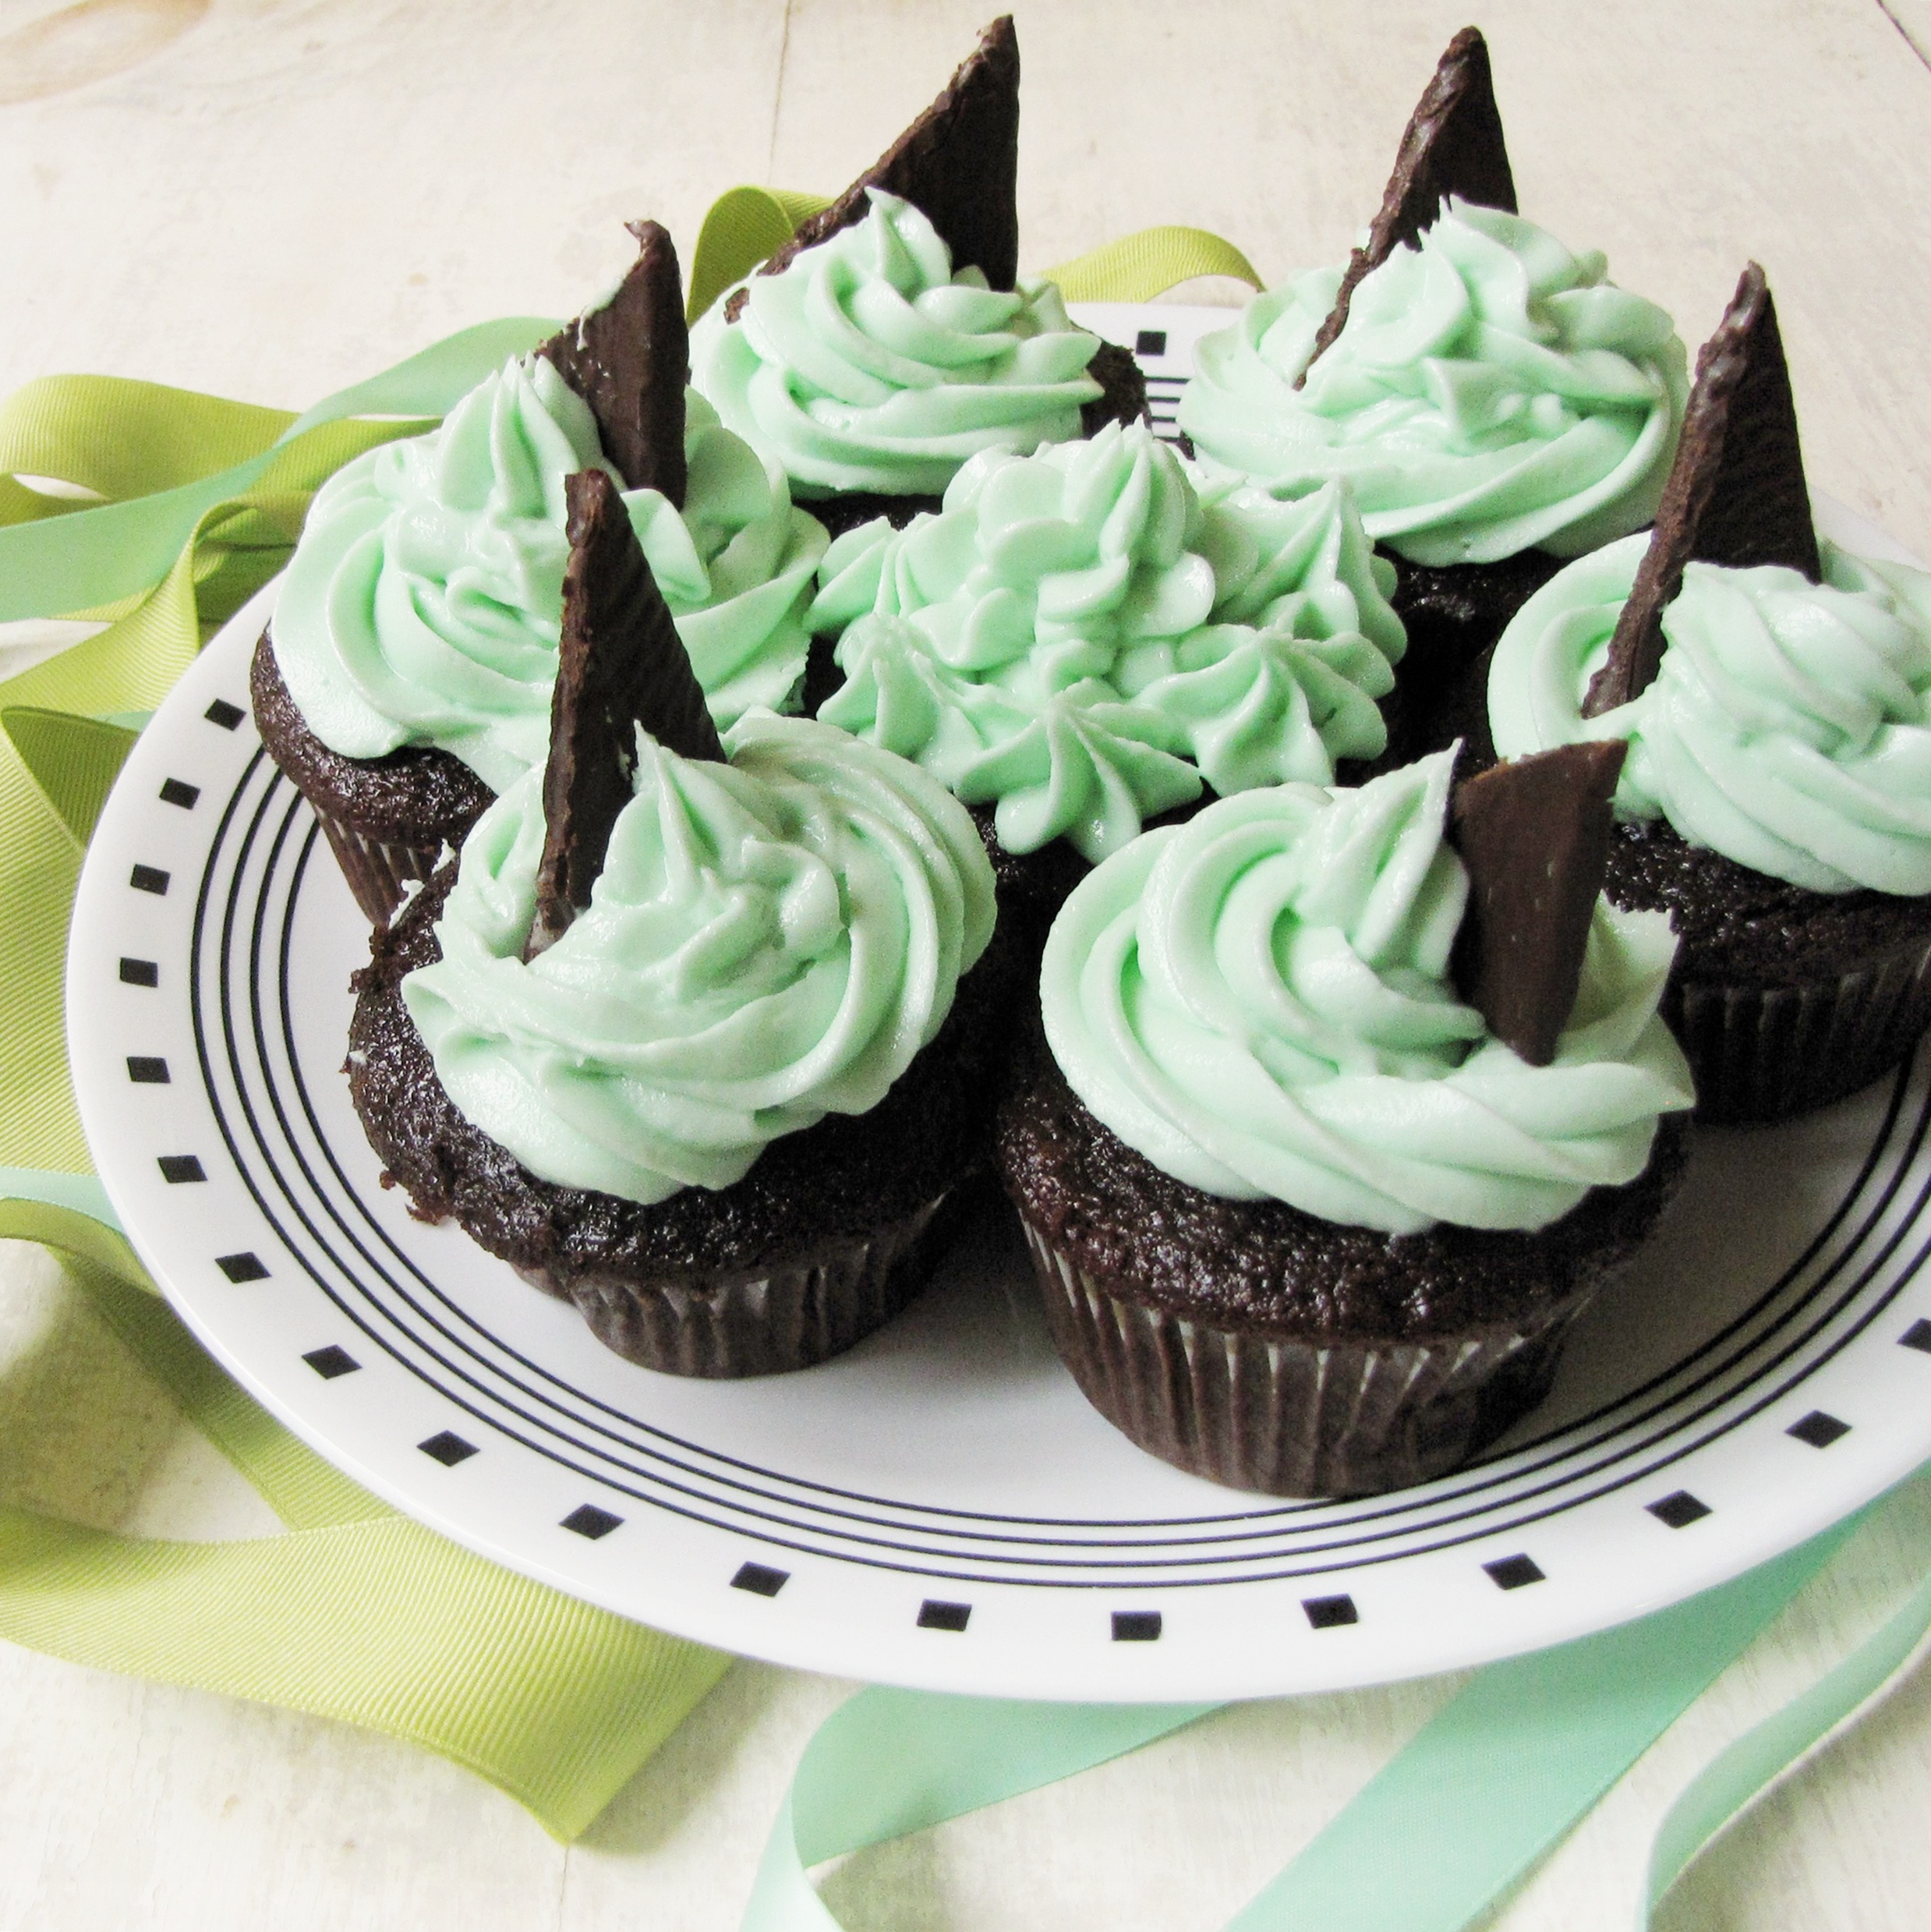 How ‘Bout … Cupcakes!